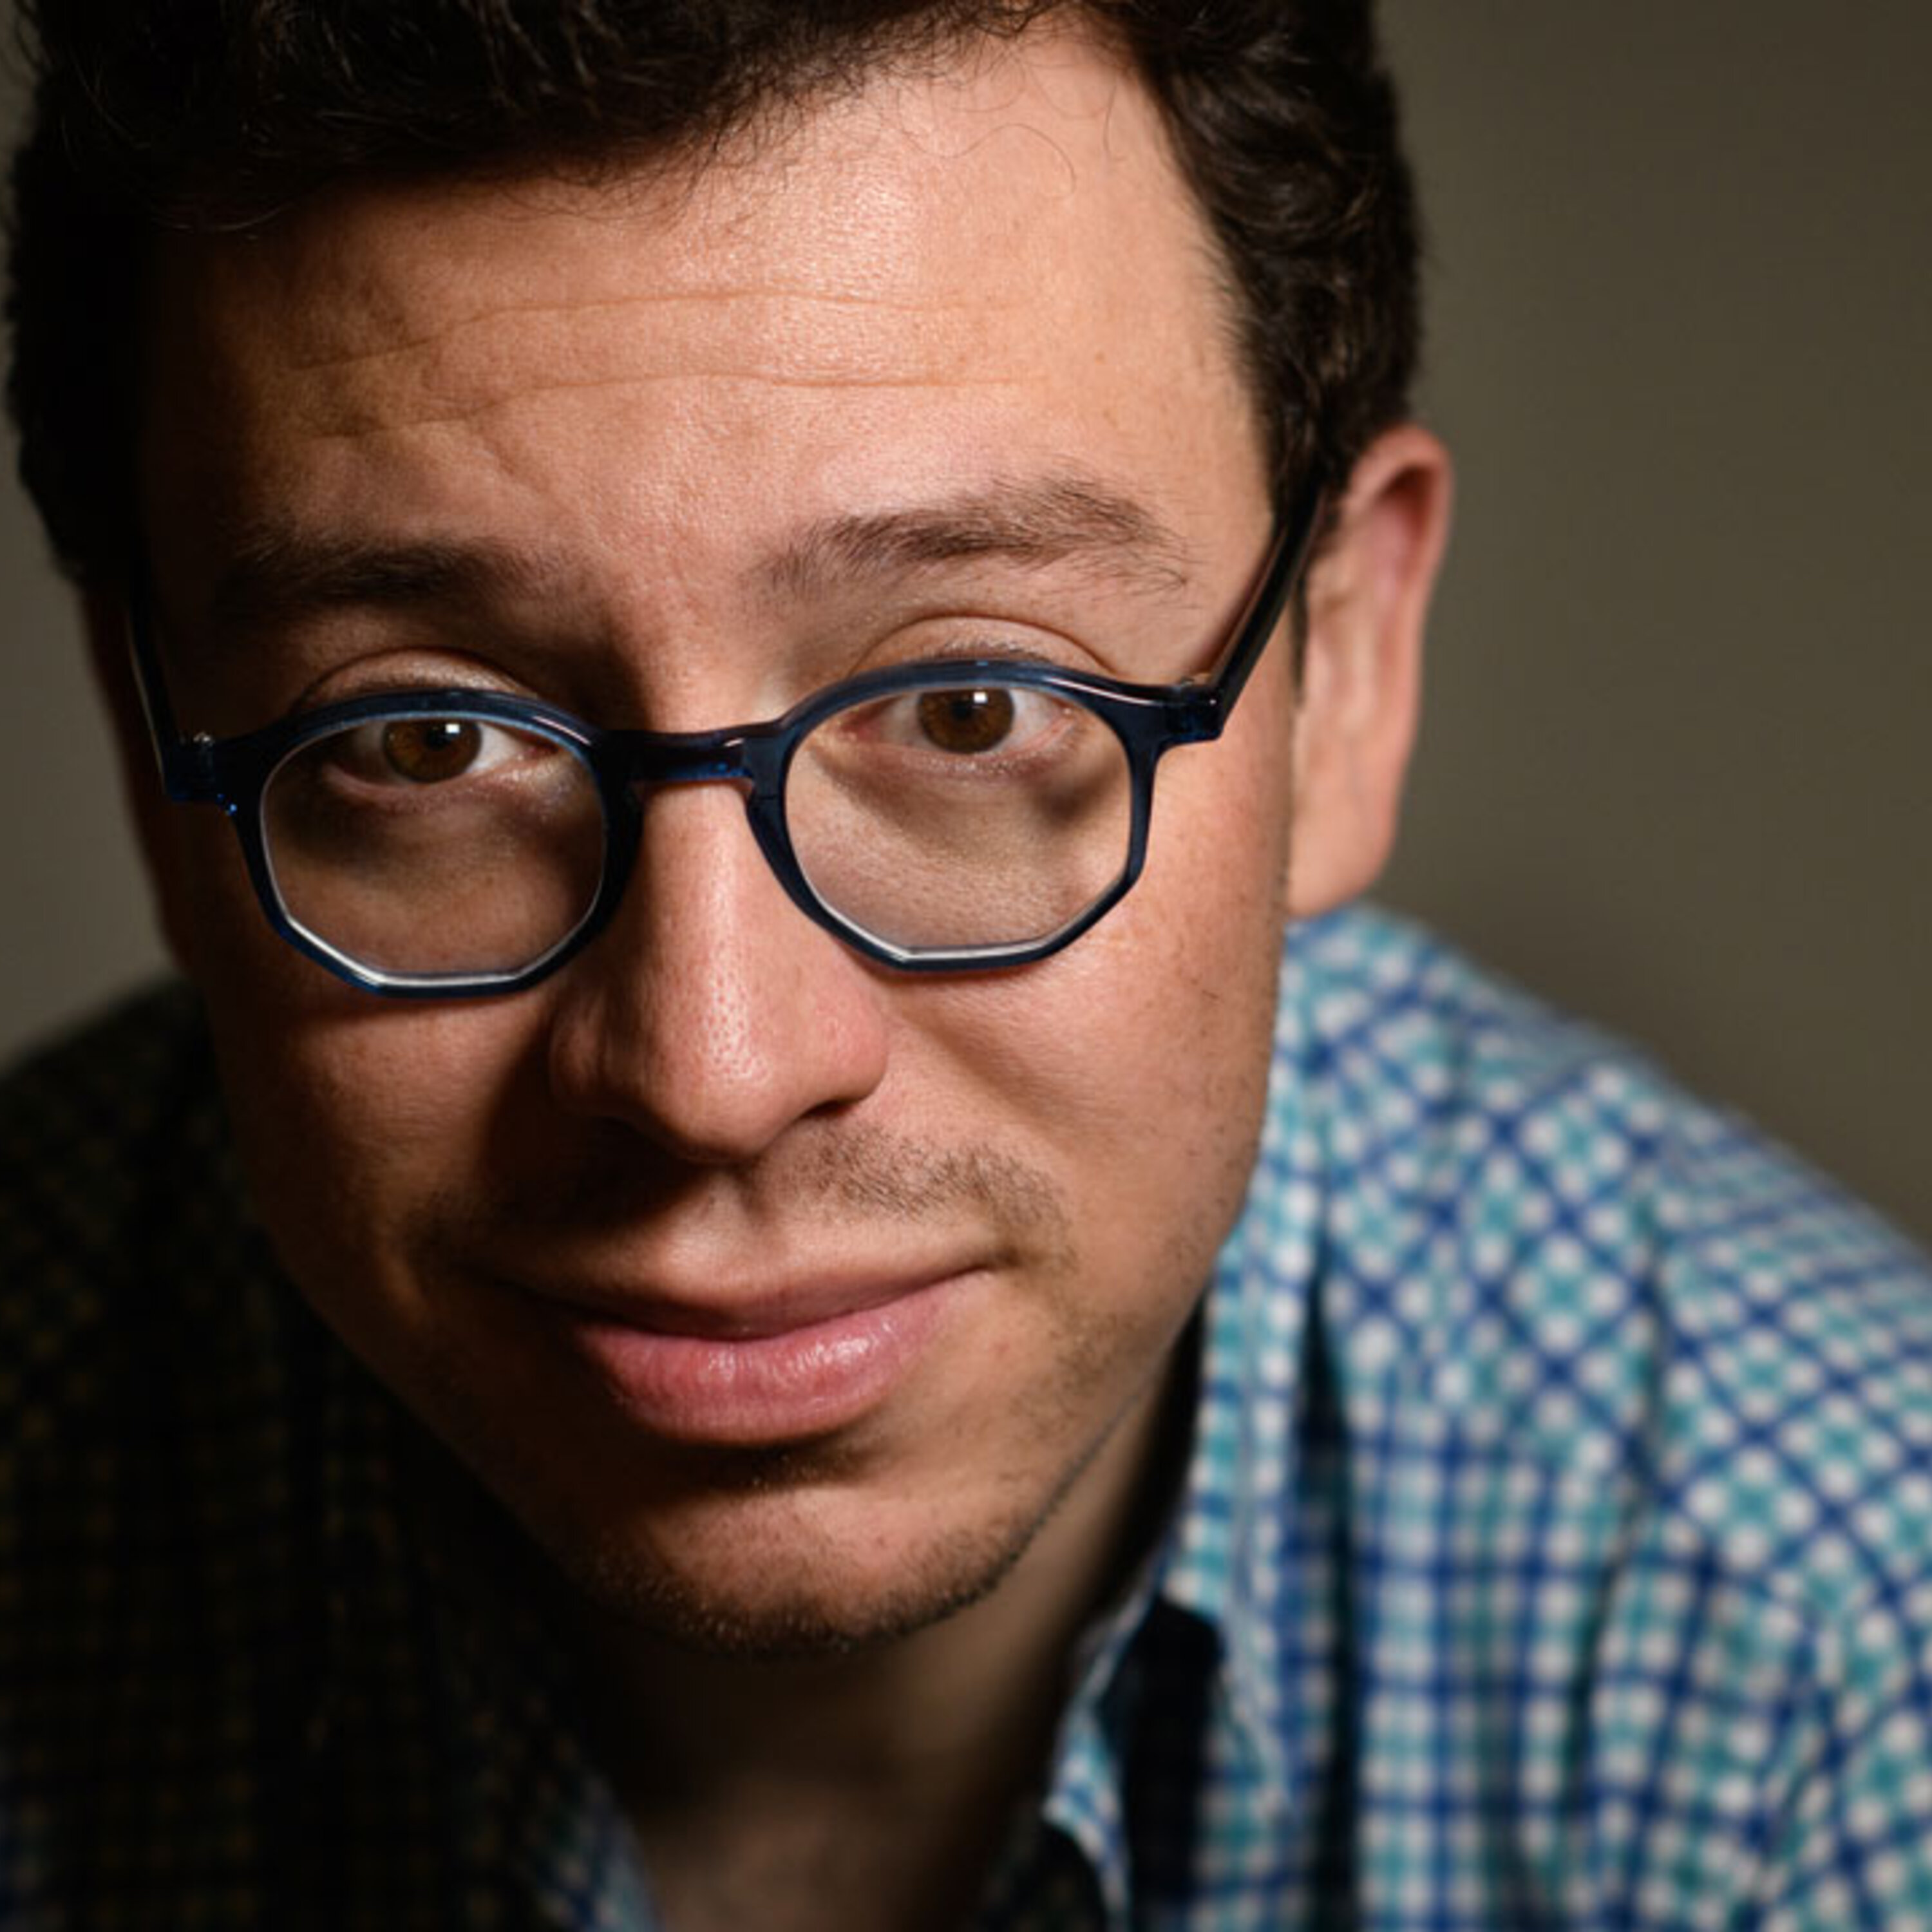 Duolingo CEO Luis von Ahn on Using Big Data for Learning Languages